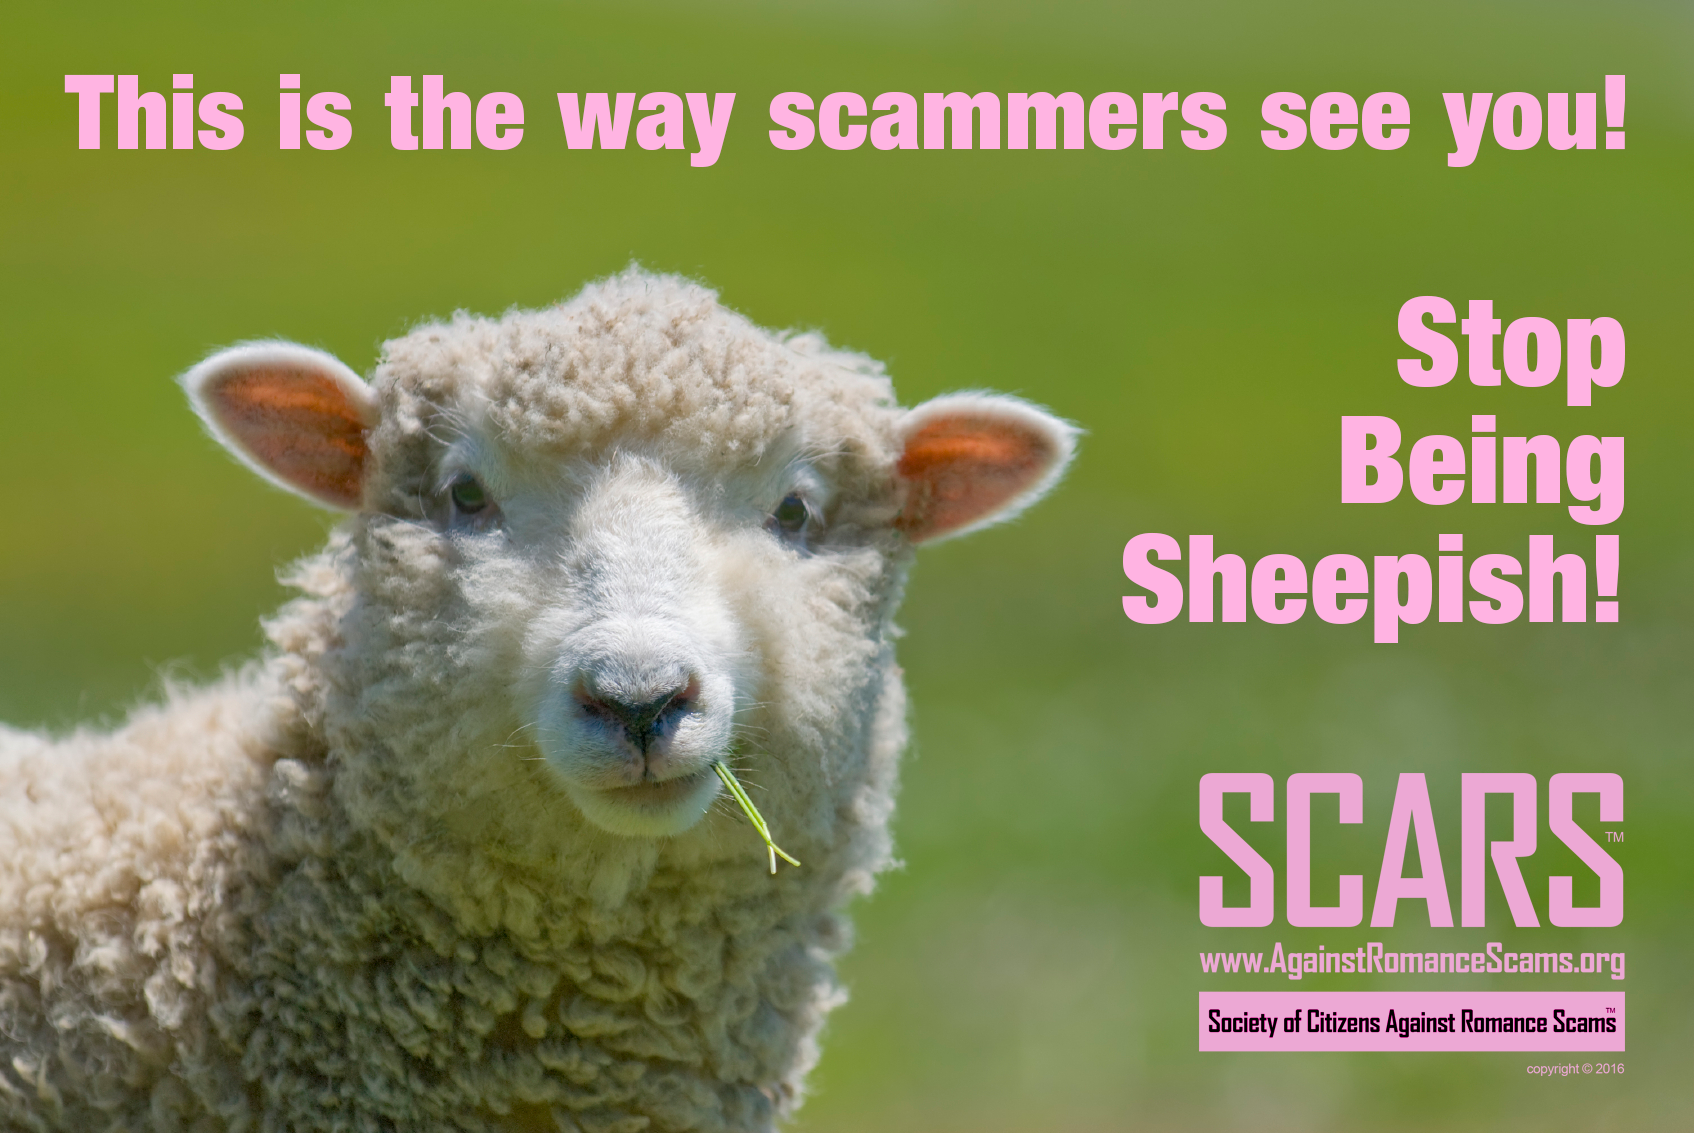 Don't Be Sheepish With Scammers!